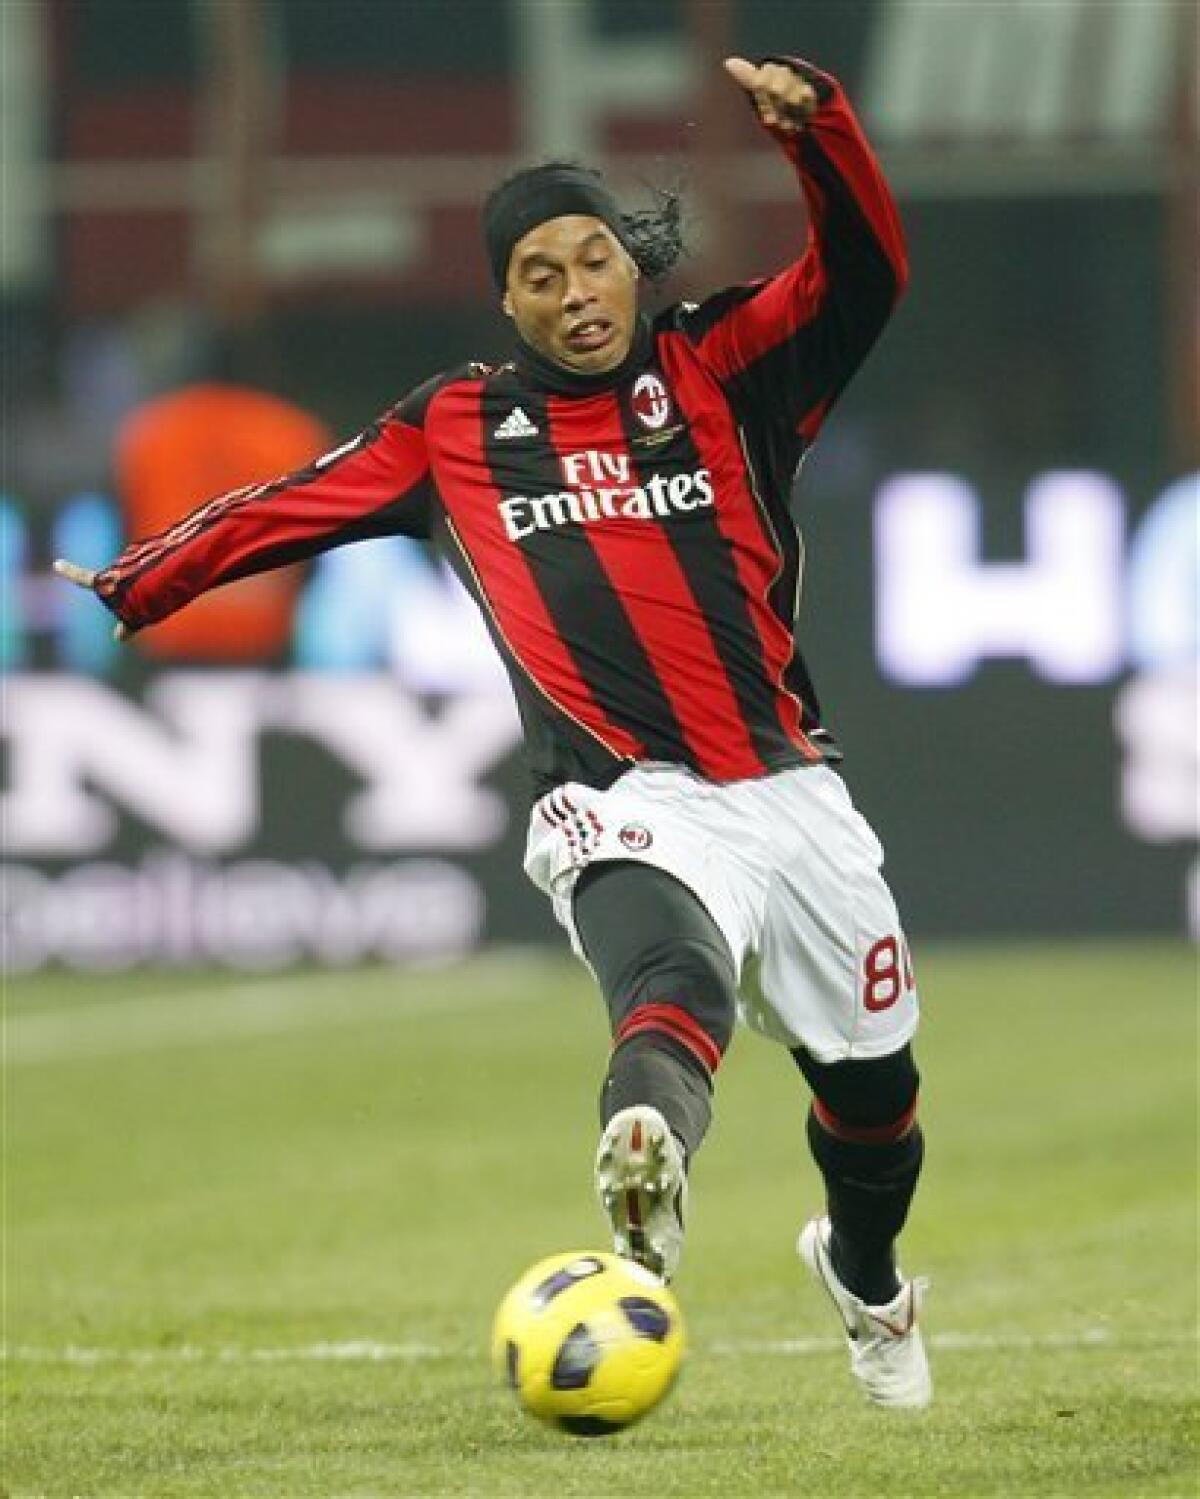 FILE - AC Milan Brazilian forward Ronaldinho controls the ball during the Serie A soccer match between AC Milan and Brescia at the San Siro stadium in Milan, Italy, in this Saturday, Dec. 4, 2010 photo from files. Ronaldinho's brother and agent said Monday, Jan. 3, 2011 the playmaker is negotiating a return to Brazil from AC Milan, with three top clubs lining up to sign him. The 30-year-old Ronaldinho is currently in Brazil and his brother Roberto Assis says Flamengo, Gremio and Palmeiras are all trying to sign the player, with a deal expected to be sealed in a few days' time. (AP Photo/Antonio Calanni, File)